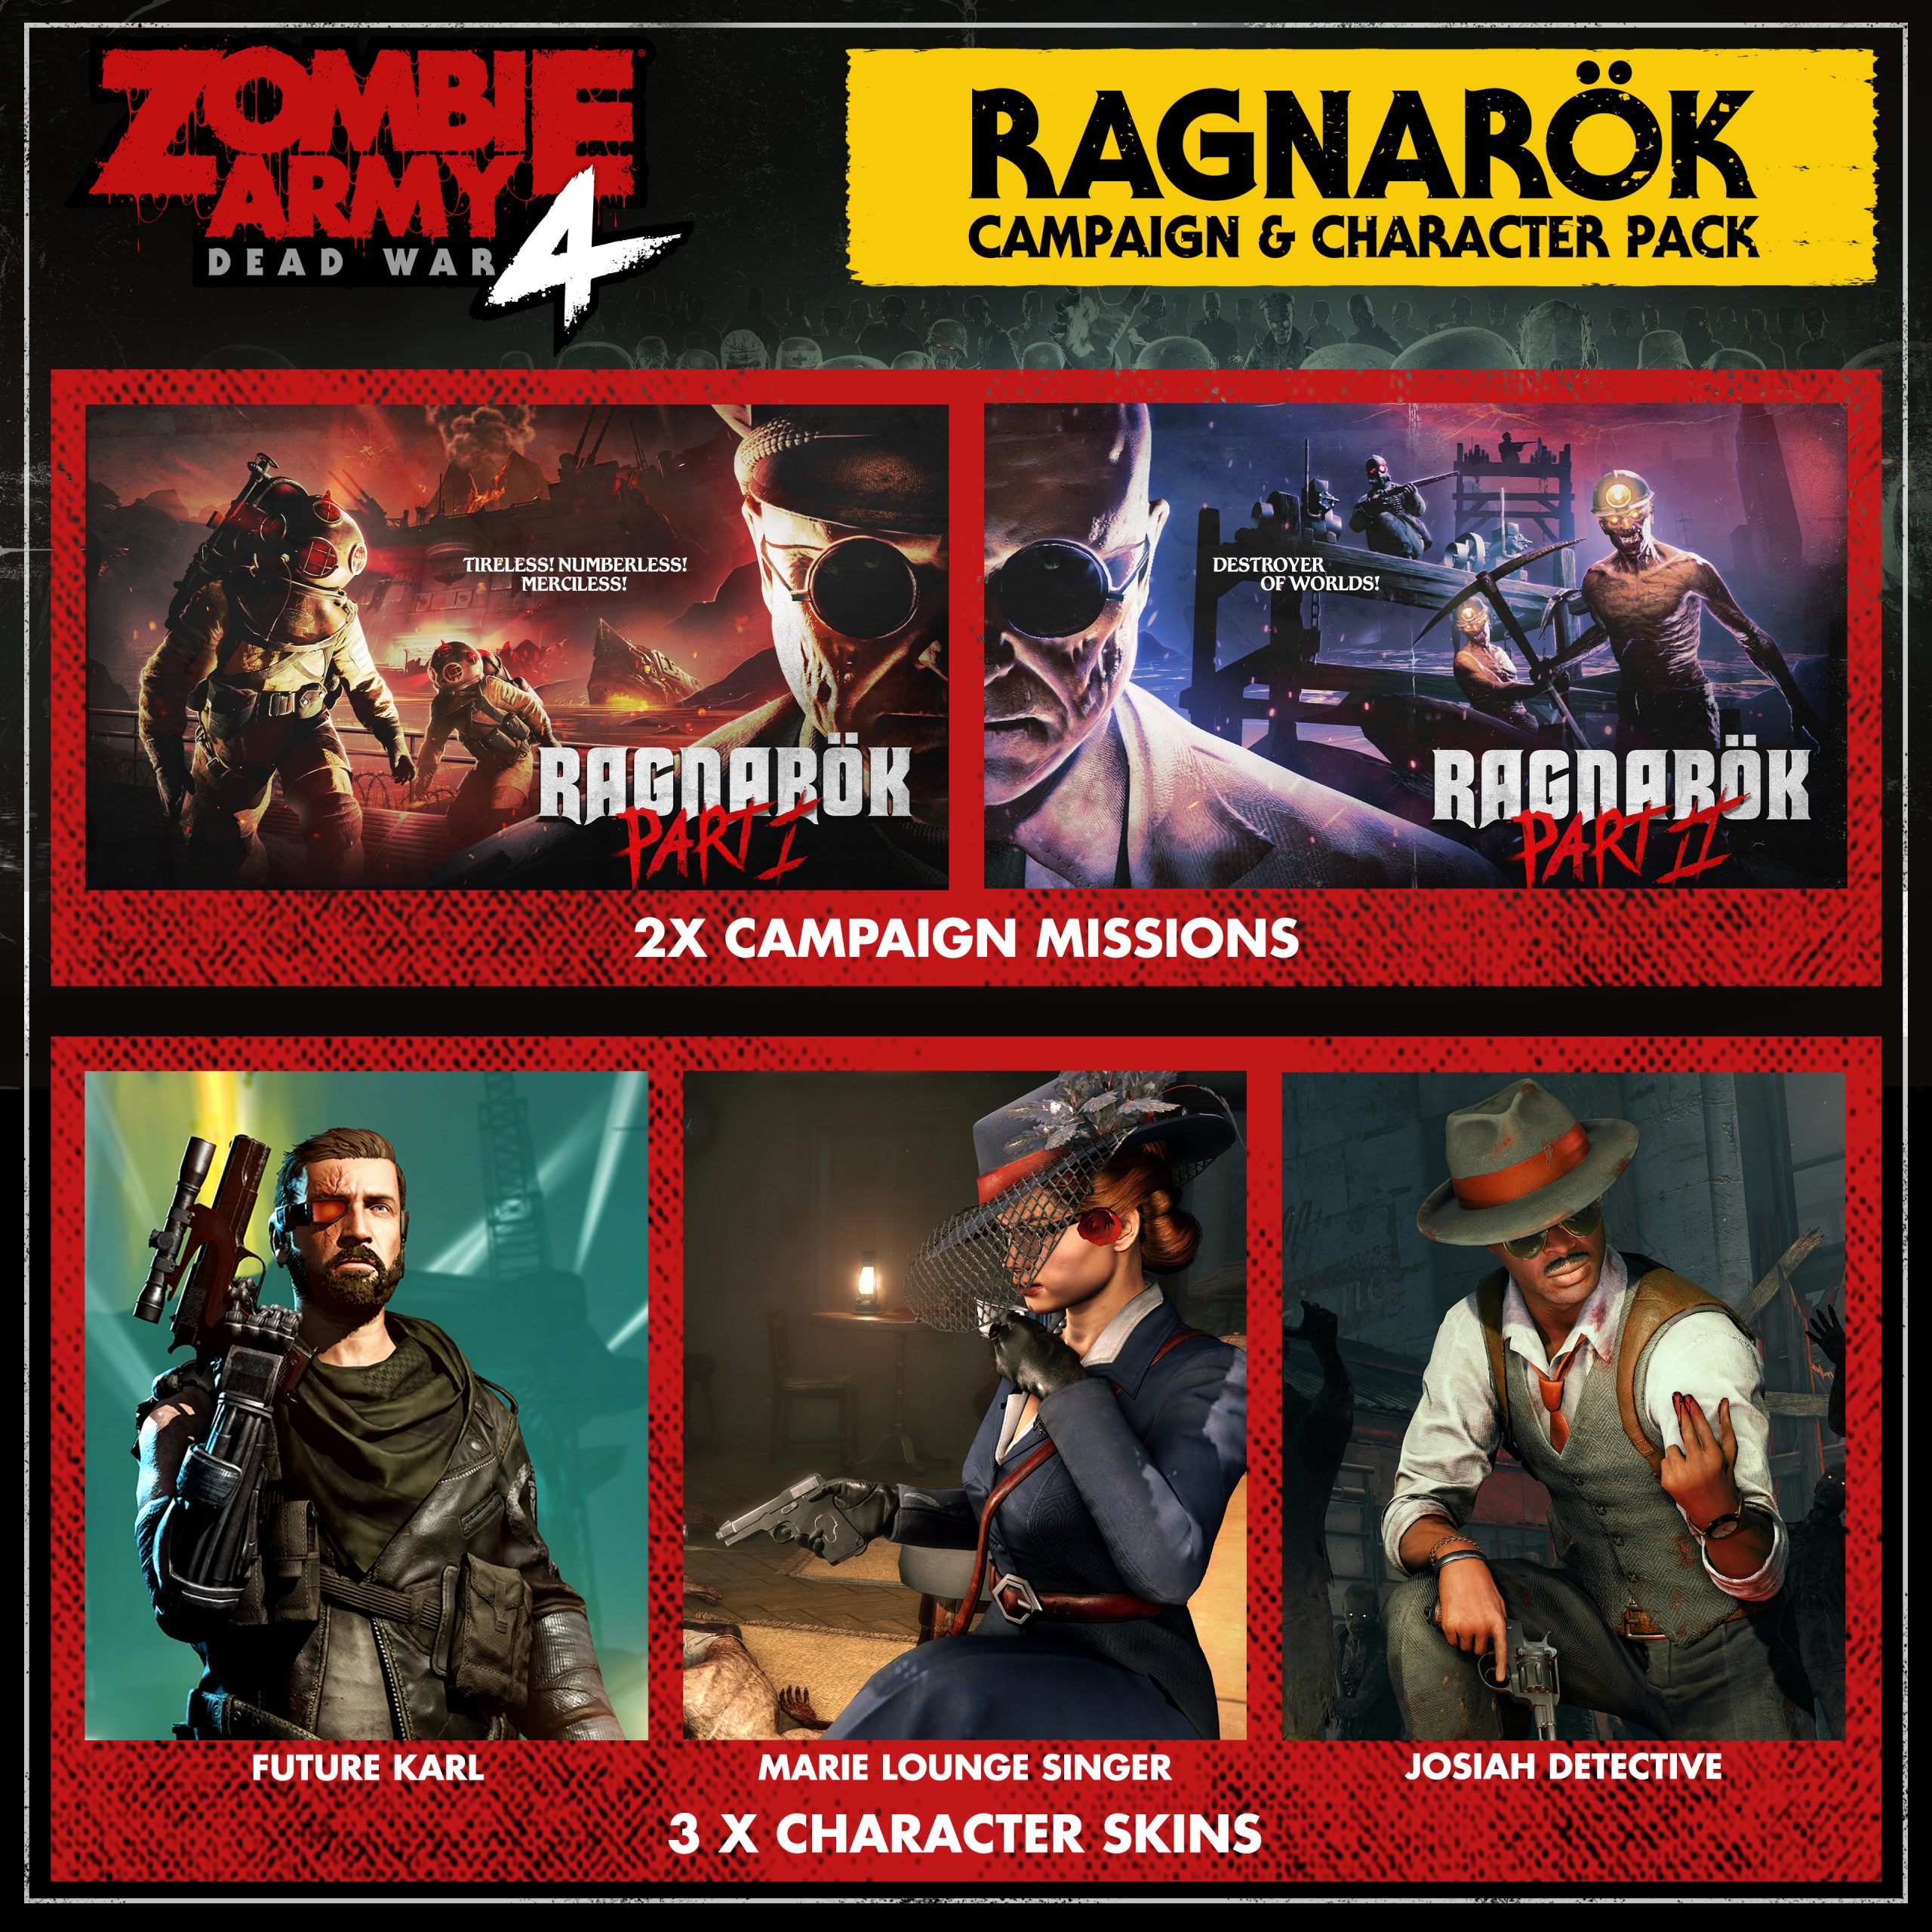 Image of a Zombie Army 4 Ragnarök Campaign & Character Pack featuring part 1 & 2 missions, Future Karl, Marie Lounge Singer and Josiah Detective packs